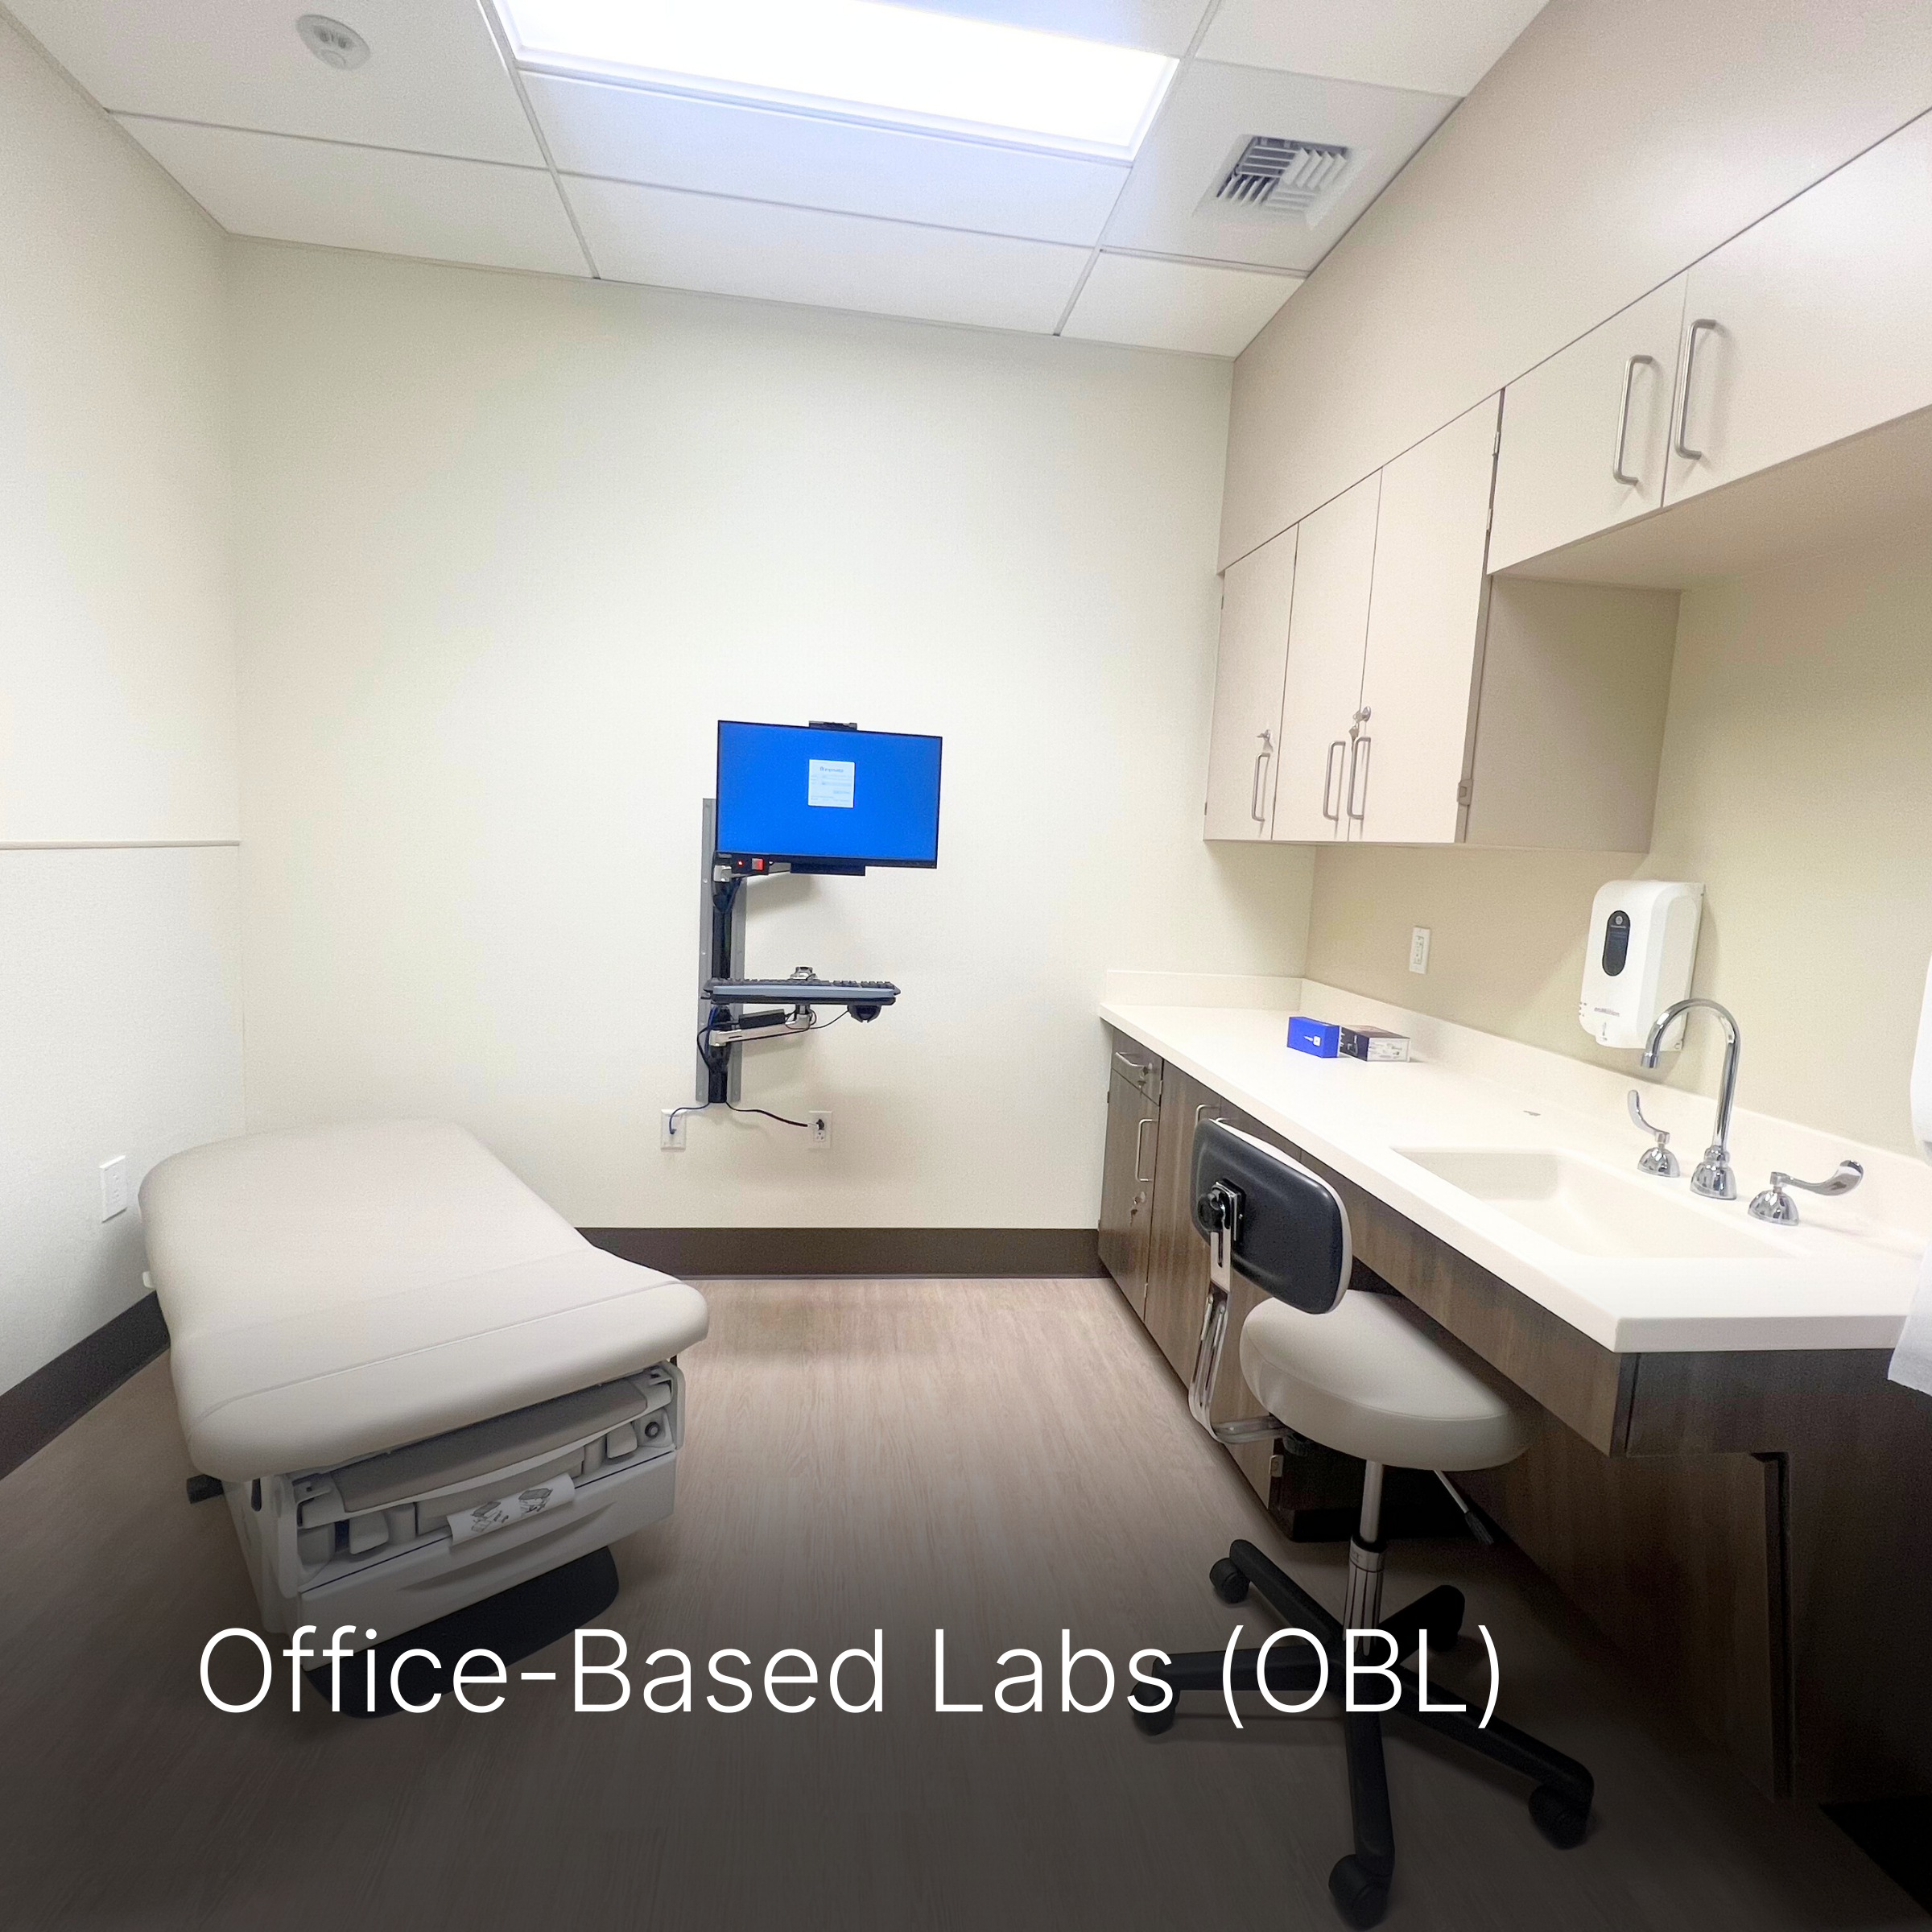 Healthcare exam room with caption of Office Based Labs (OBL).